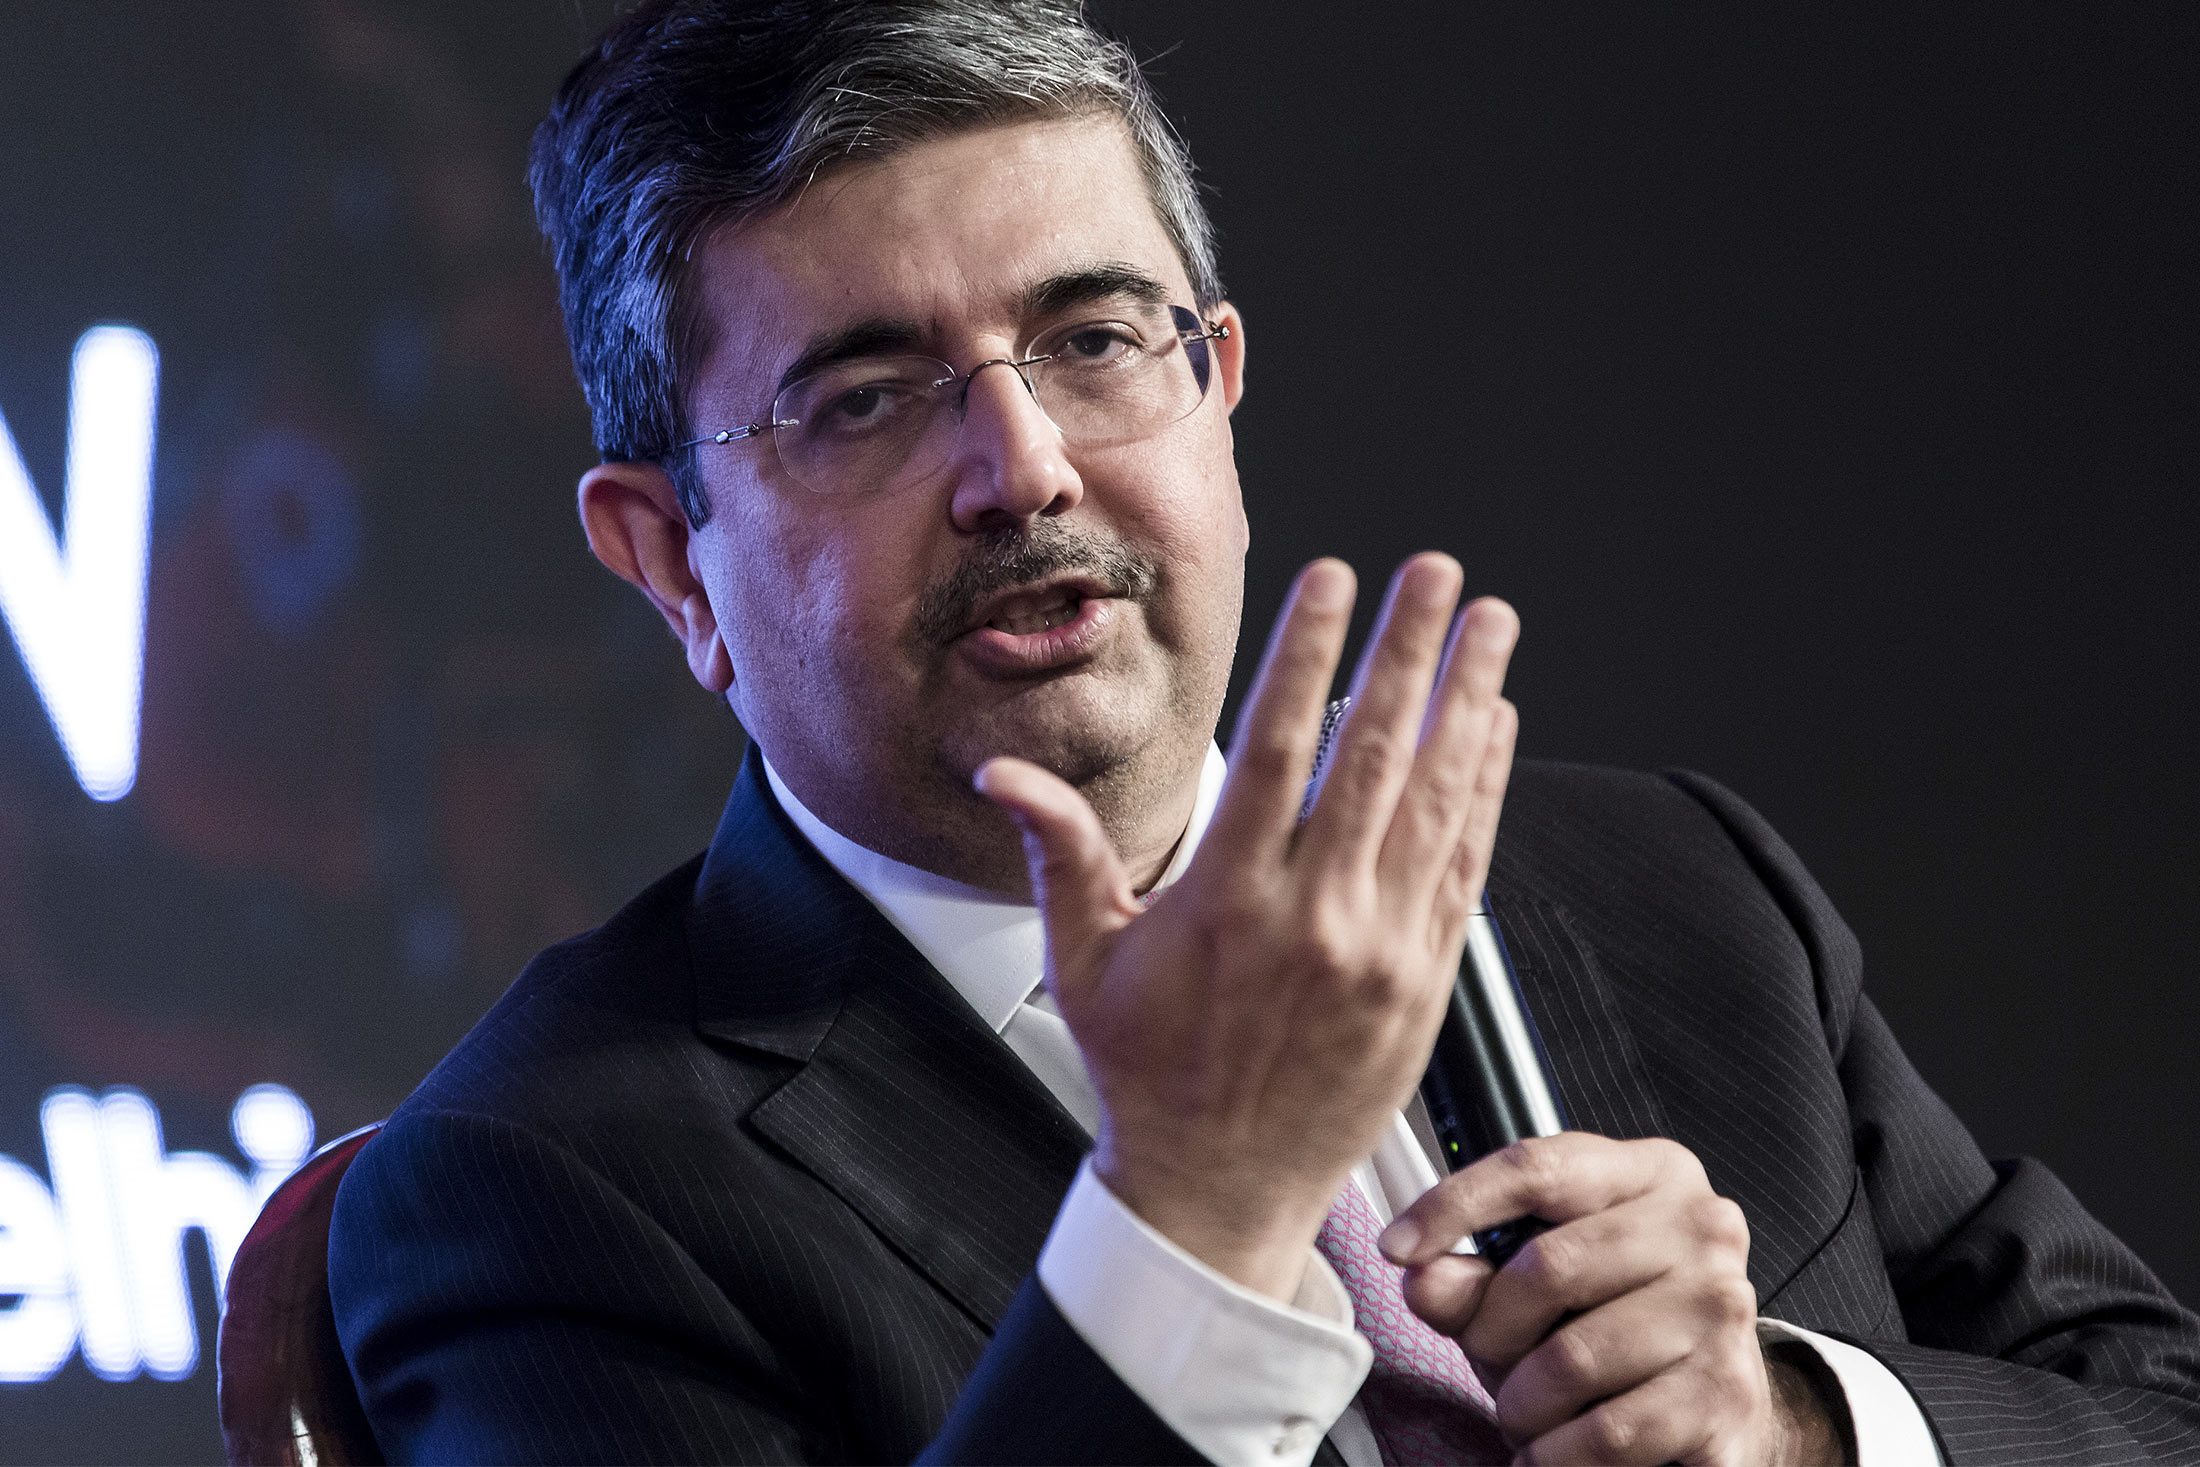 Battling bad loans fanned the wealth of India's Uday Kotak — the world's richest banker worth $16b